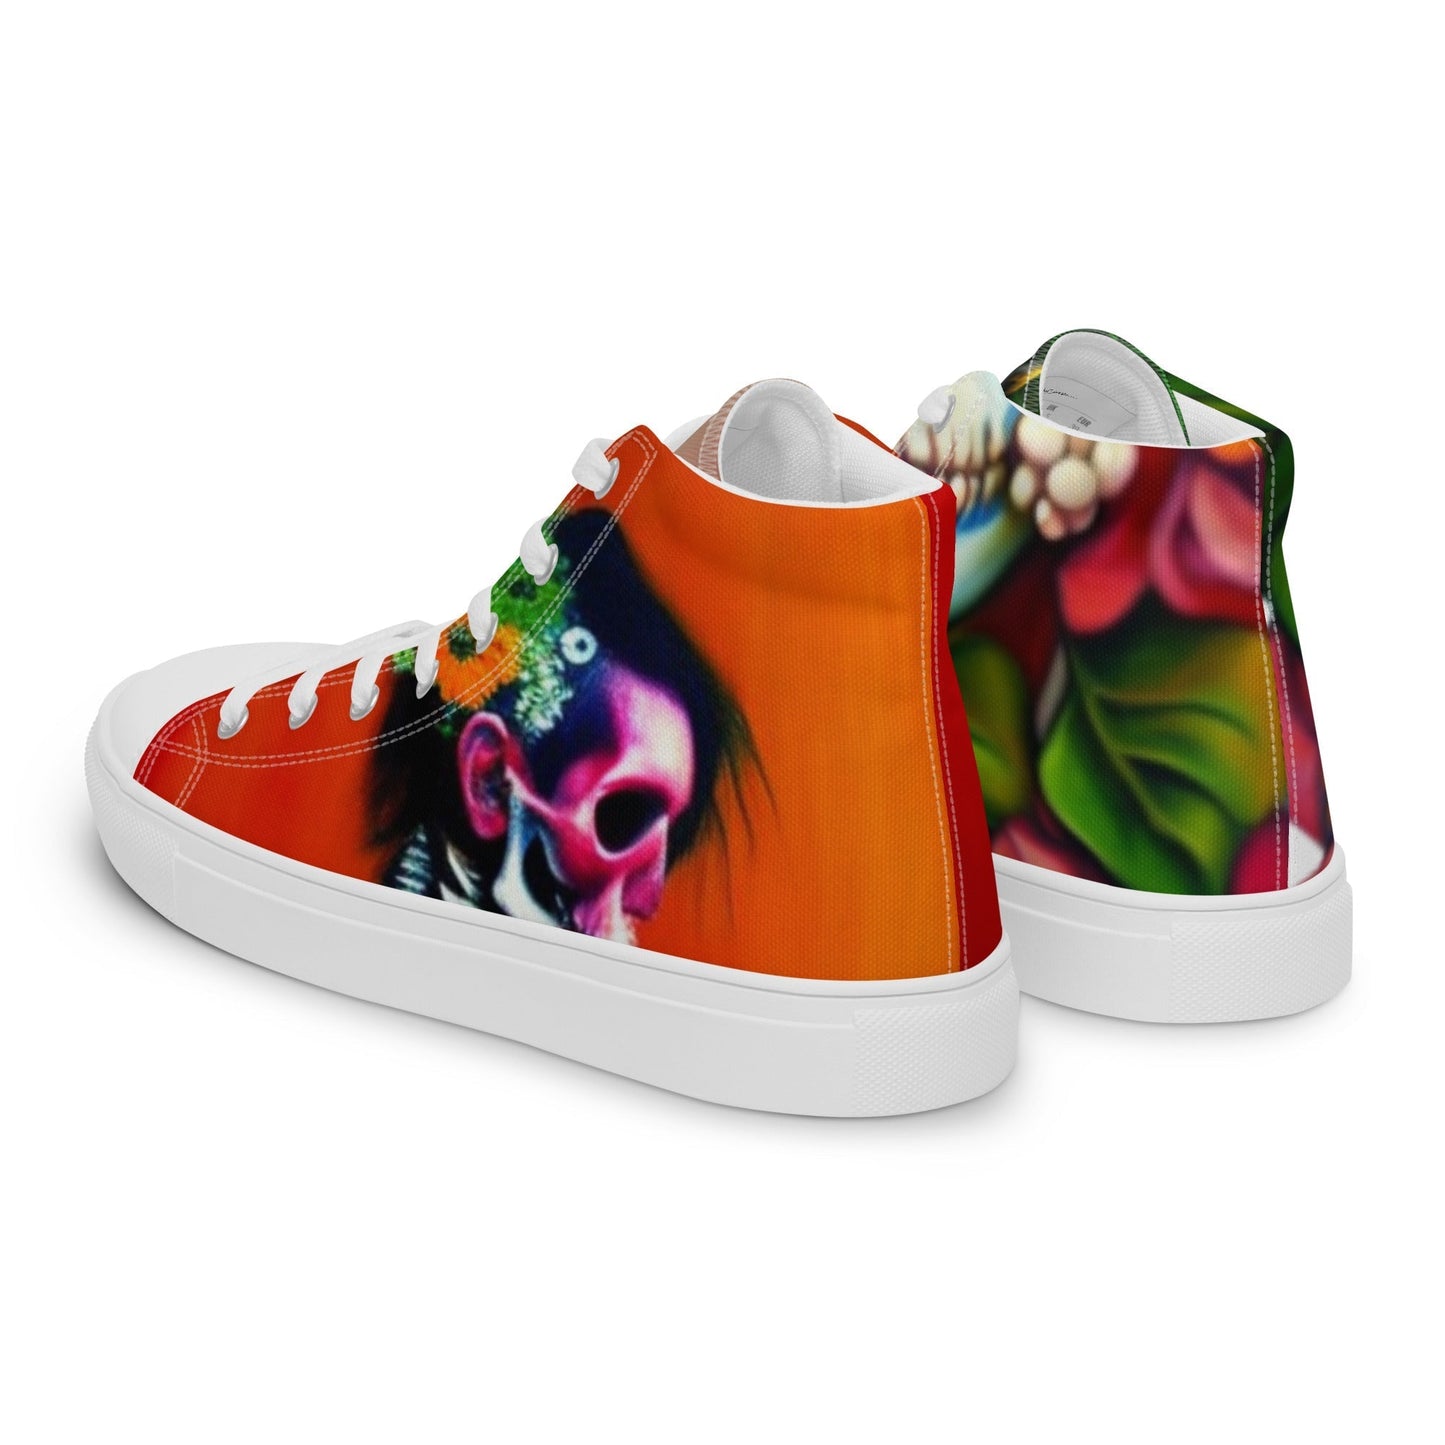 Enchanted Journey - Step into Adventure with Our Women's High Top Canvas Shoes by Guy Christopher - Soft, Breathable Comfort that Feels Like Walking on Clouds - Guy Christopher